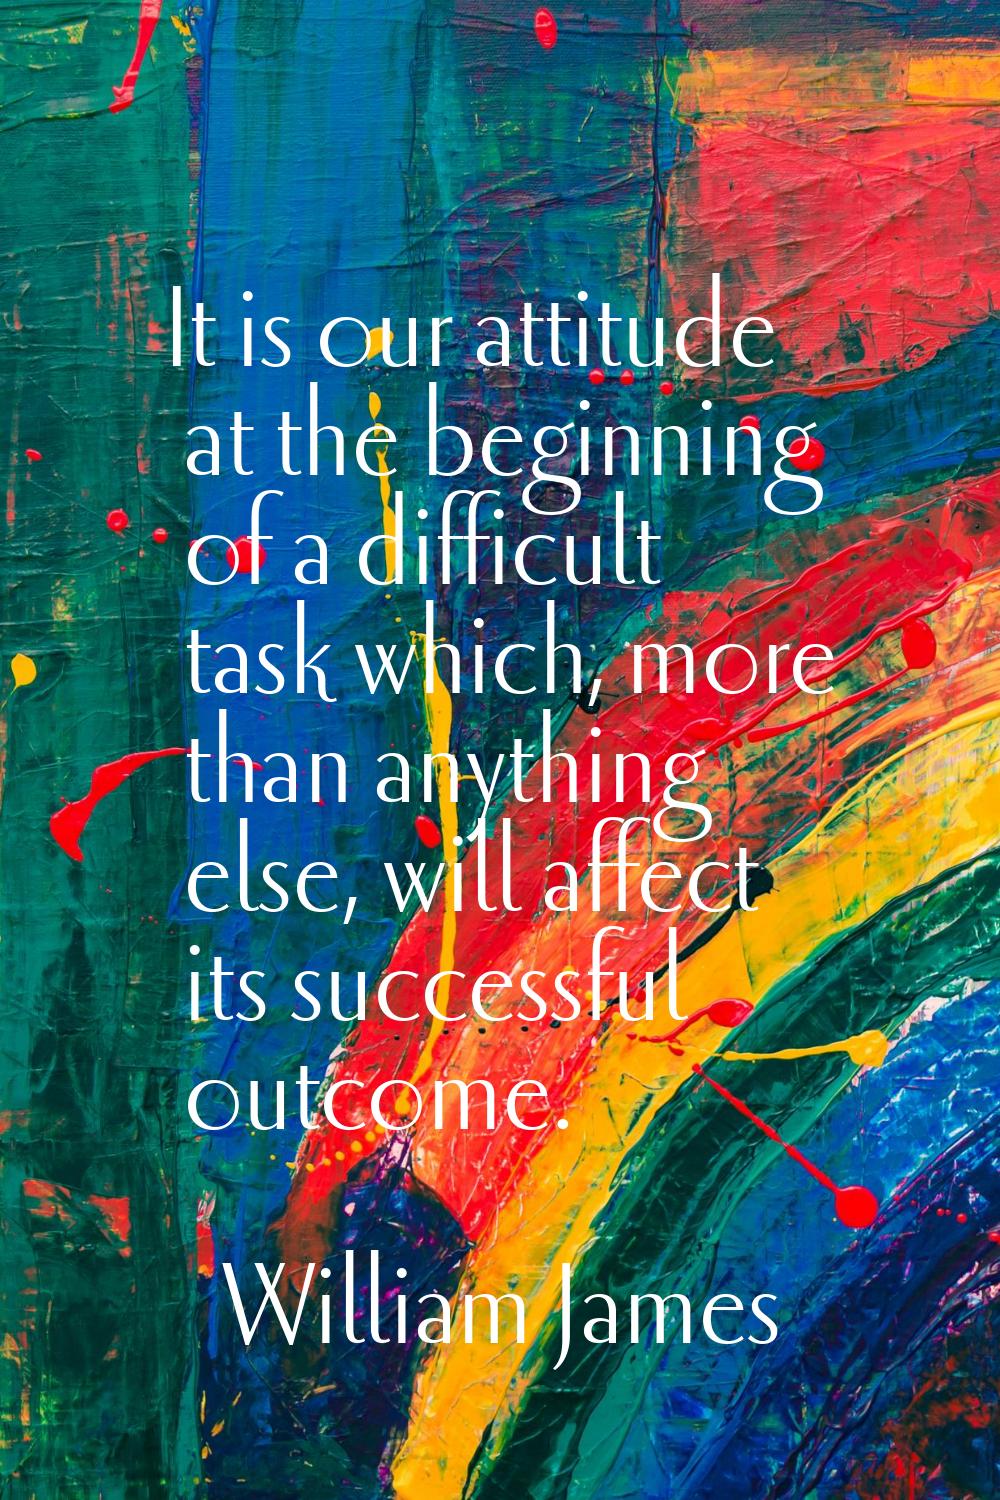 It is our attitude at the beginning of a difficult task which, more than anything else, will affect